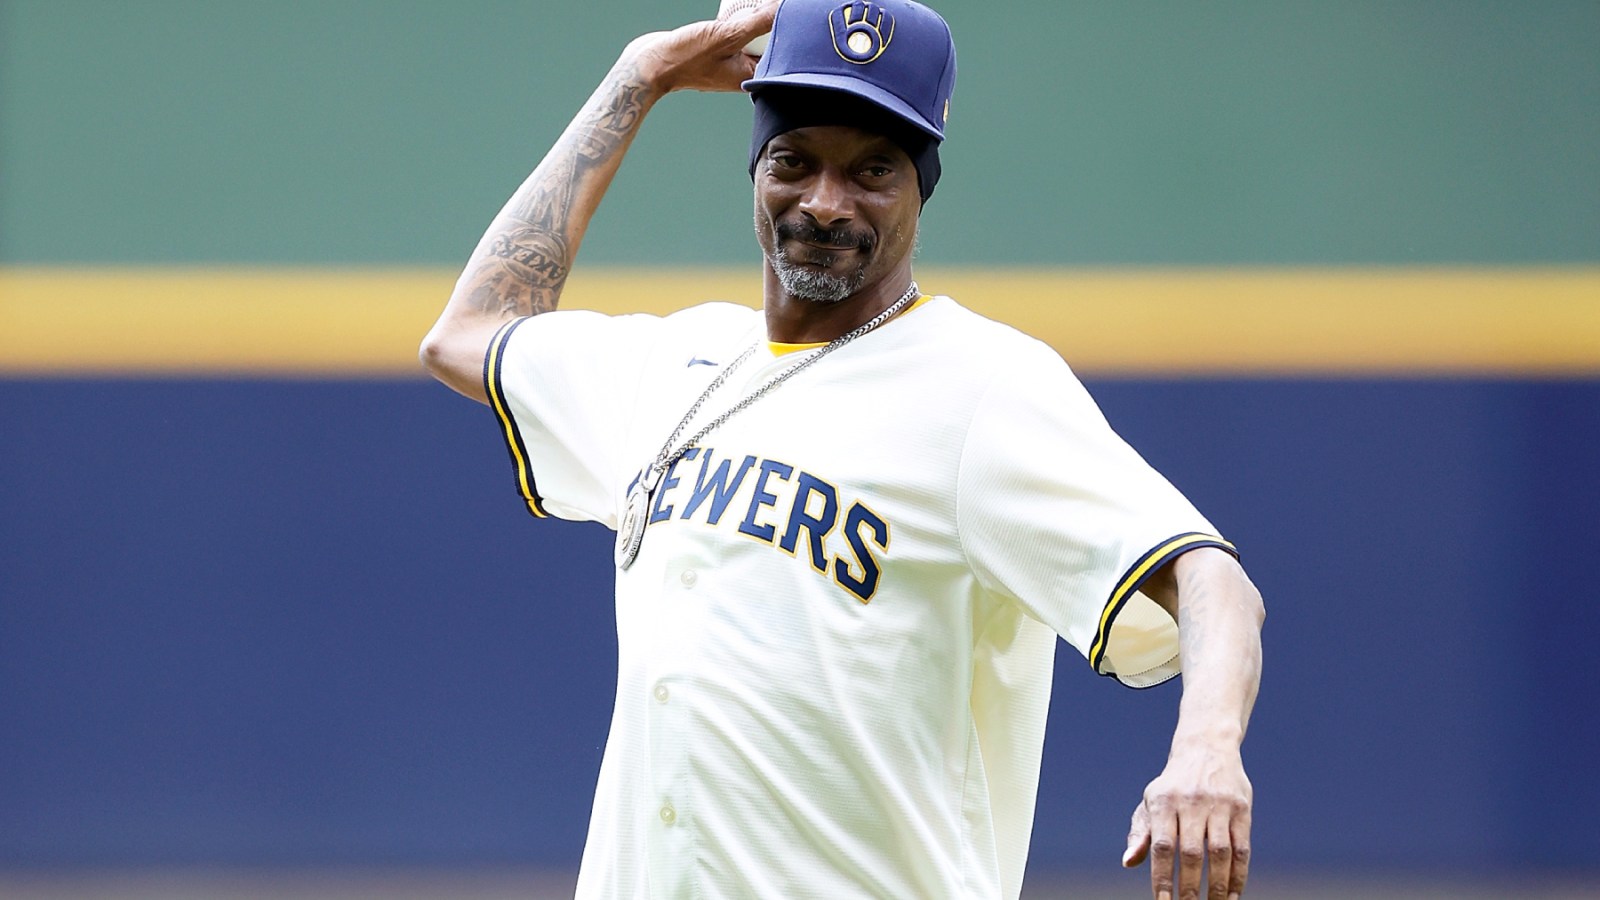 See Snoop Dogg Throw First Pitch, Give Play-by-Play at Brewers Game